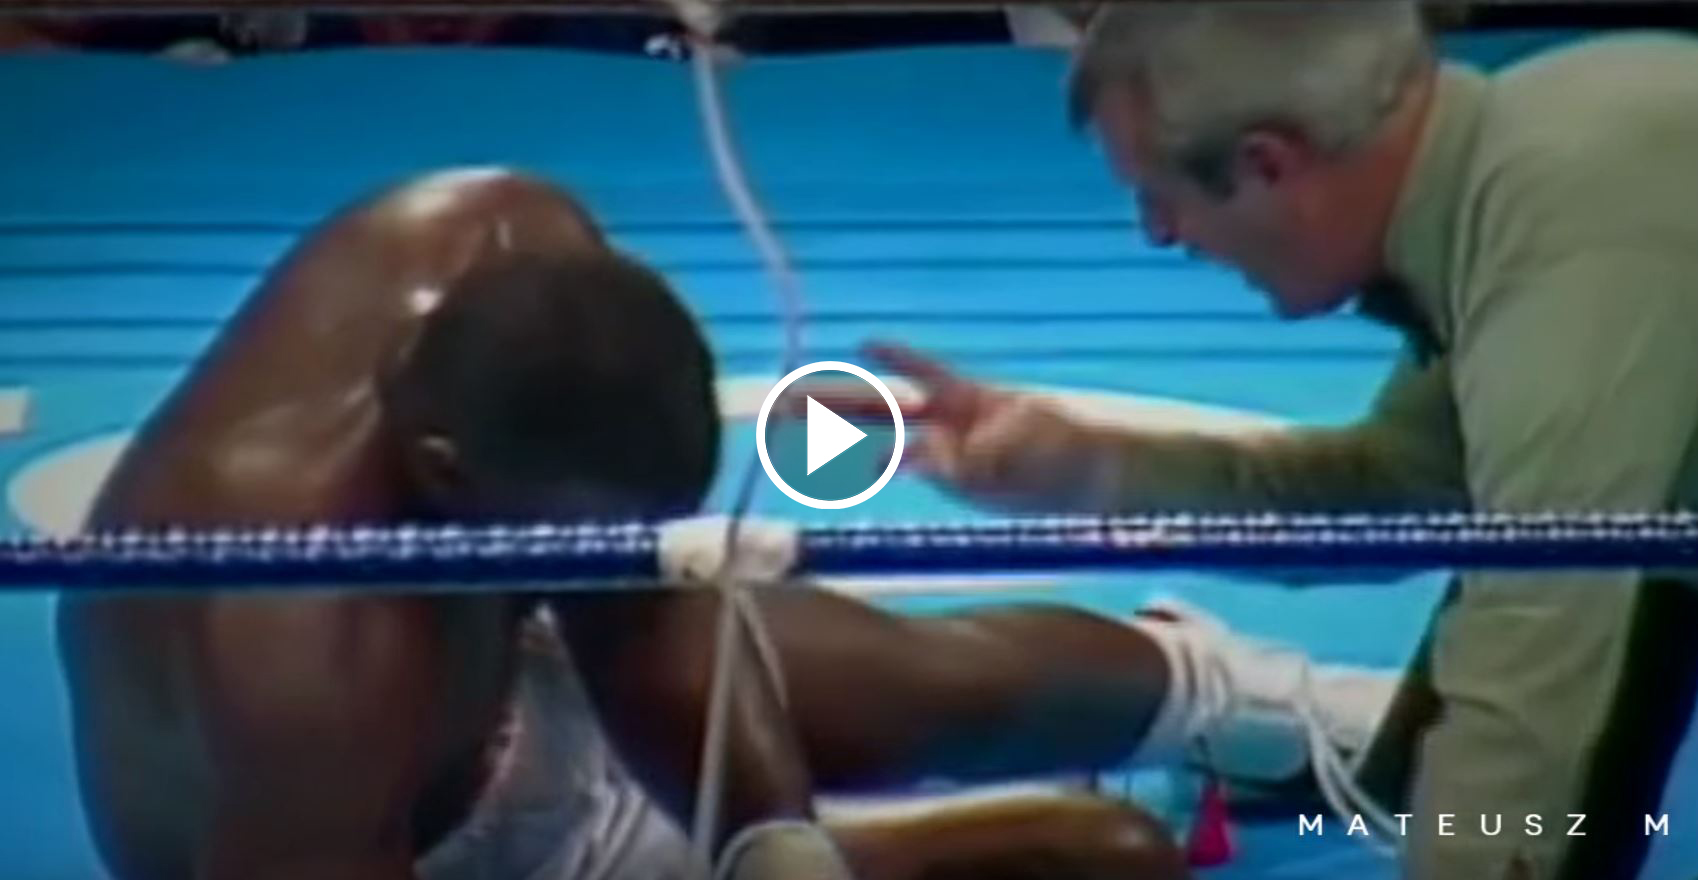 THIS Beyond POWERFUL Motivational Video will Show You How to Win even if You've been Knocked Down by Mike Tyson